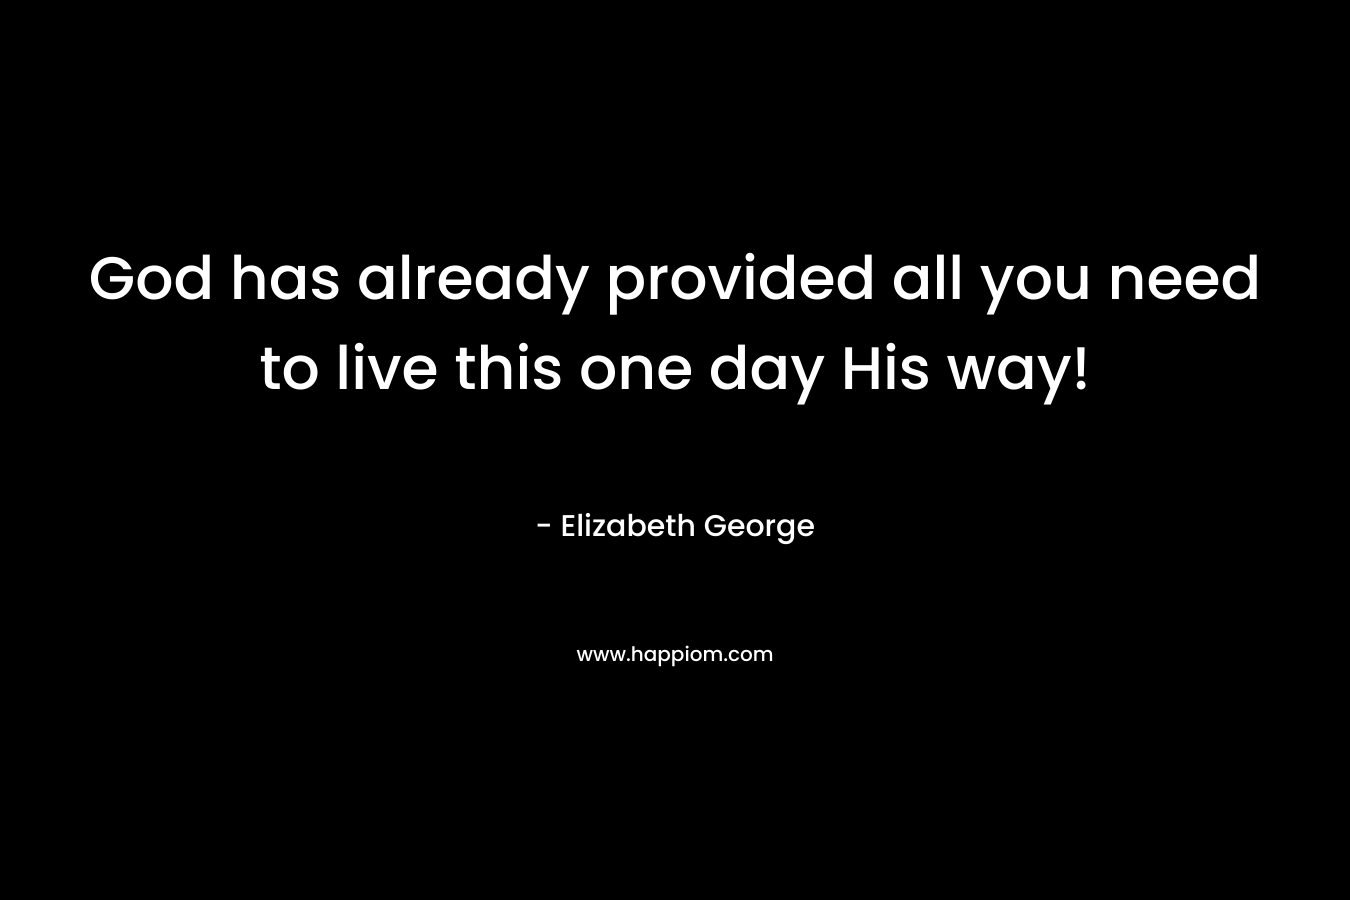 God has already provided all you need to live this one day His way! – Elizabeth George